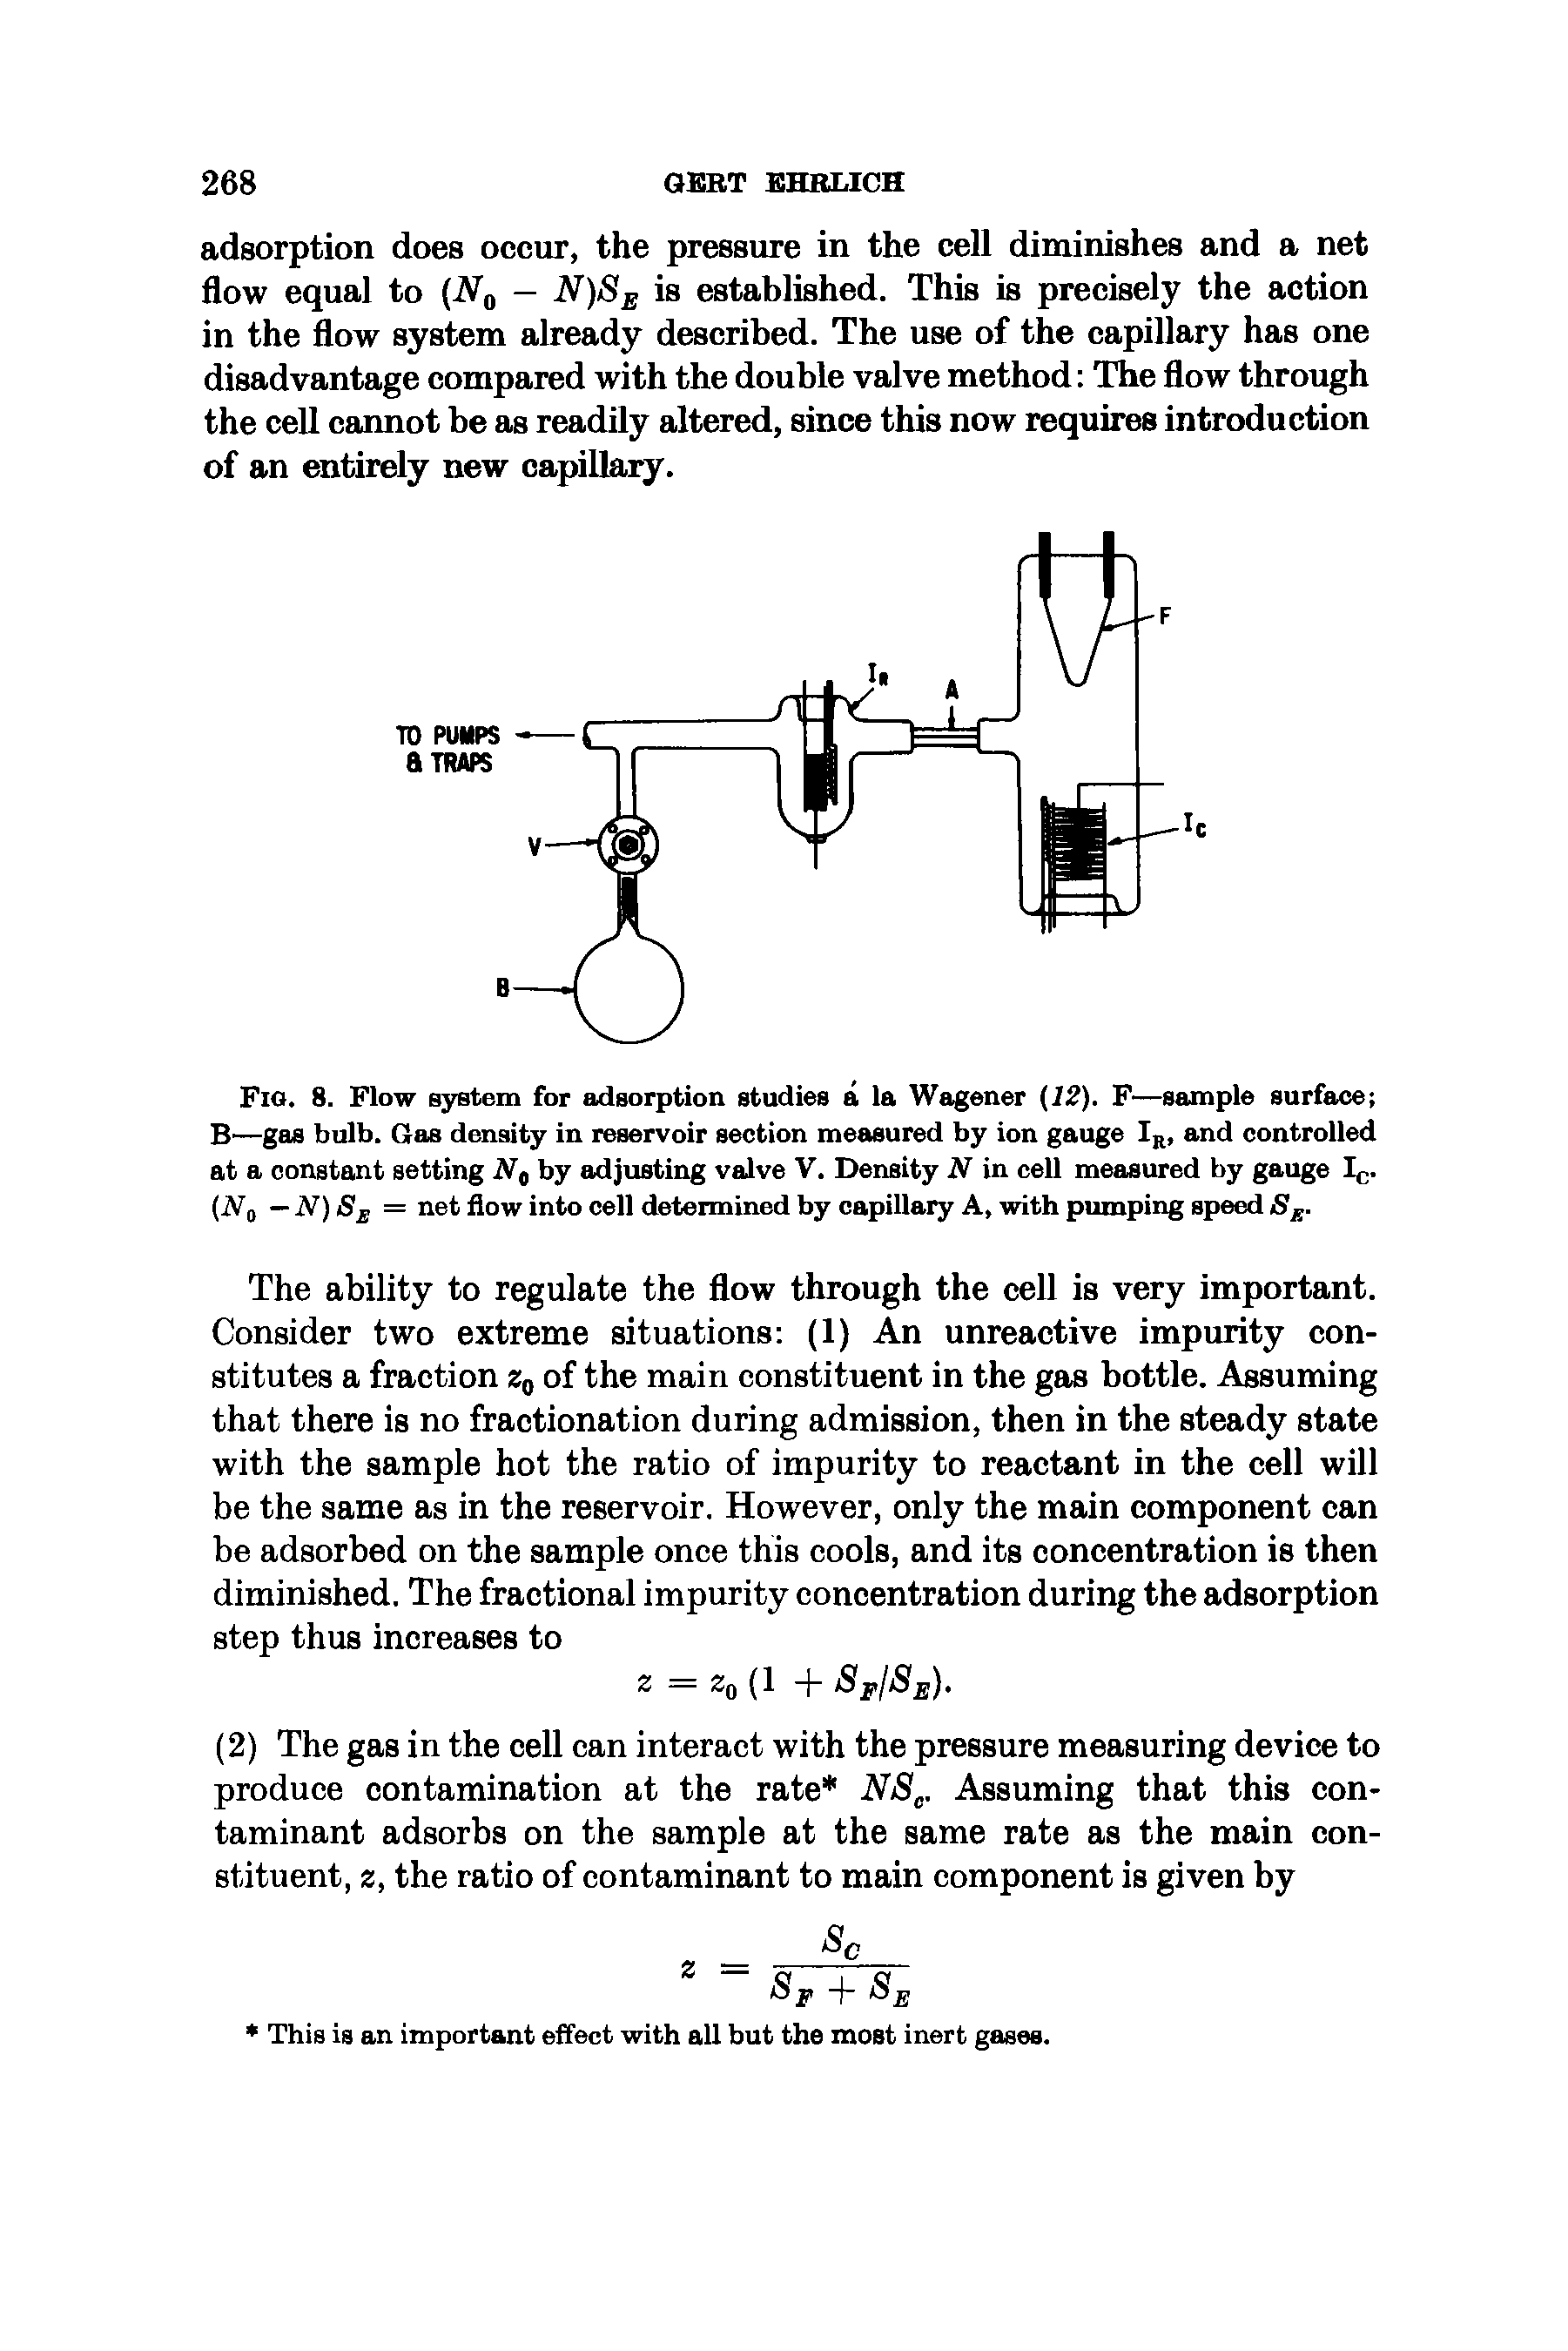 Fig. 8. Flow system for adsorption studies a la Wagener (12). F—sample surface B—gas bulb. Gas density in reservoir section measured by ion gauge IR, and controlled at a constant setting Nt by adjusting valve V. Density N in cell measured by gauge In. (jV —N)Se = net flow into cell determined by capillary A, with pumping speed SE.